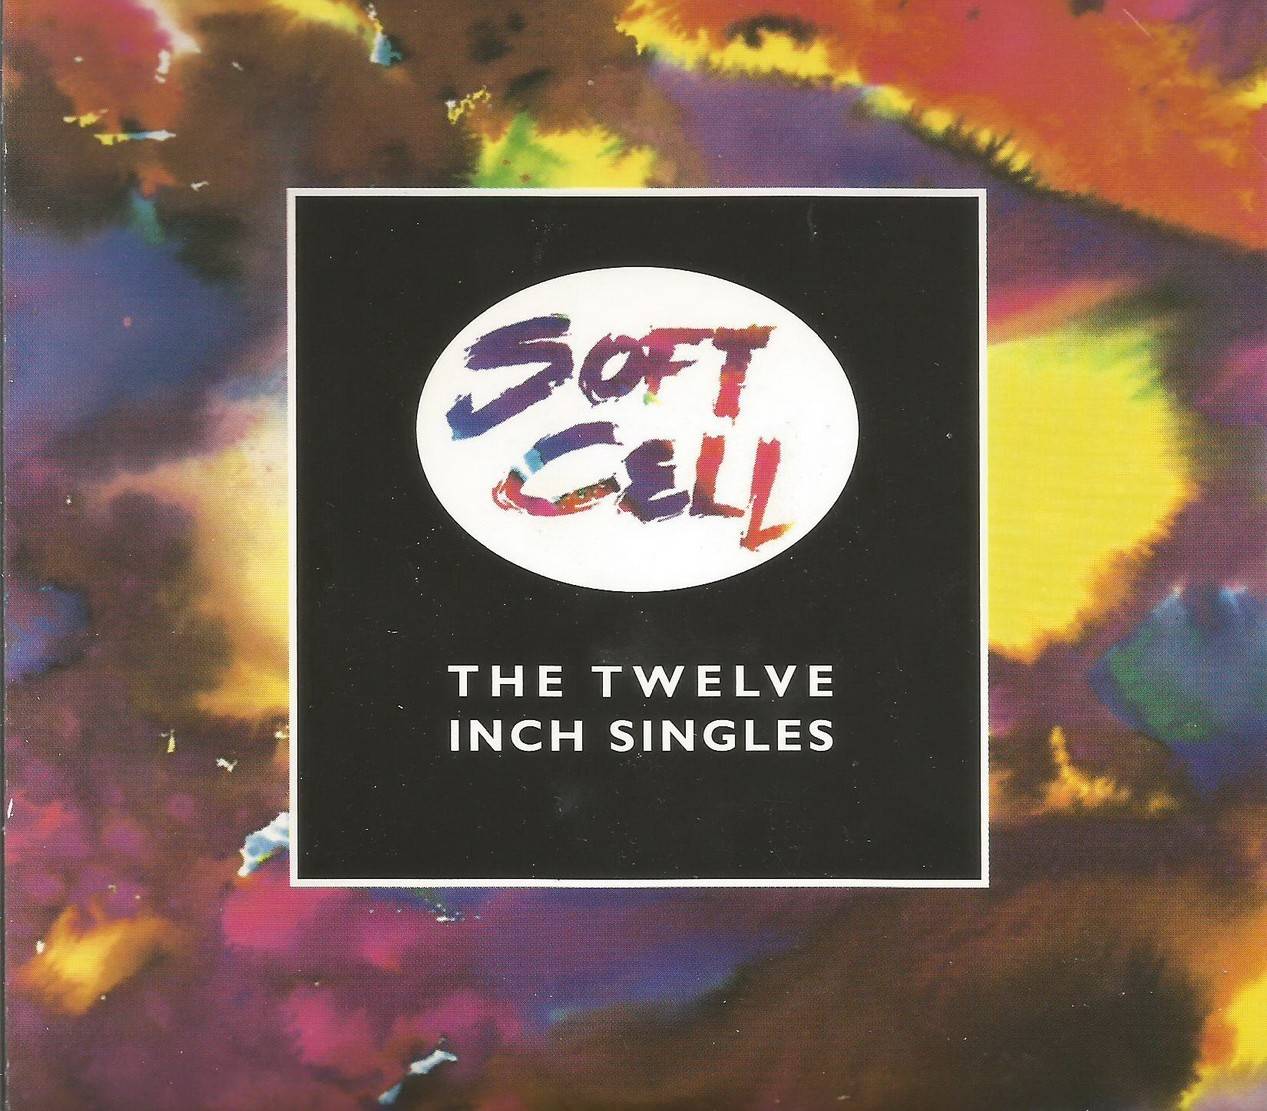 soft cell complete discography torrent